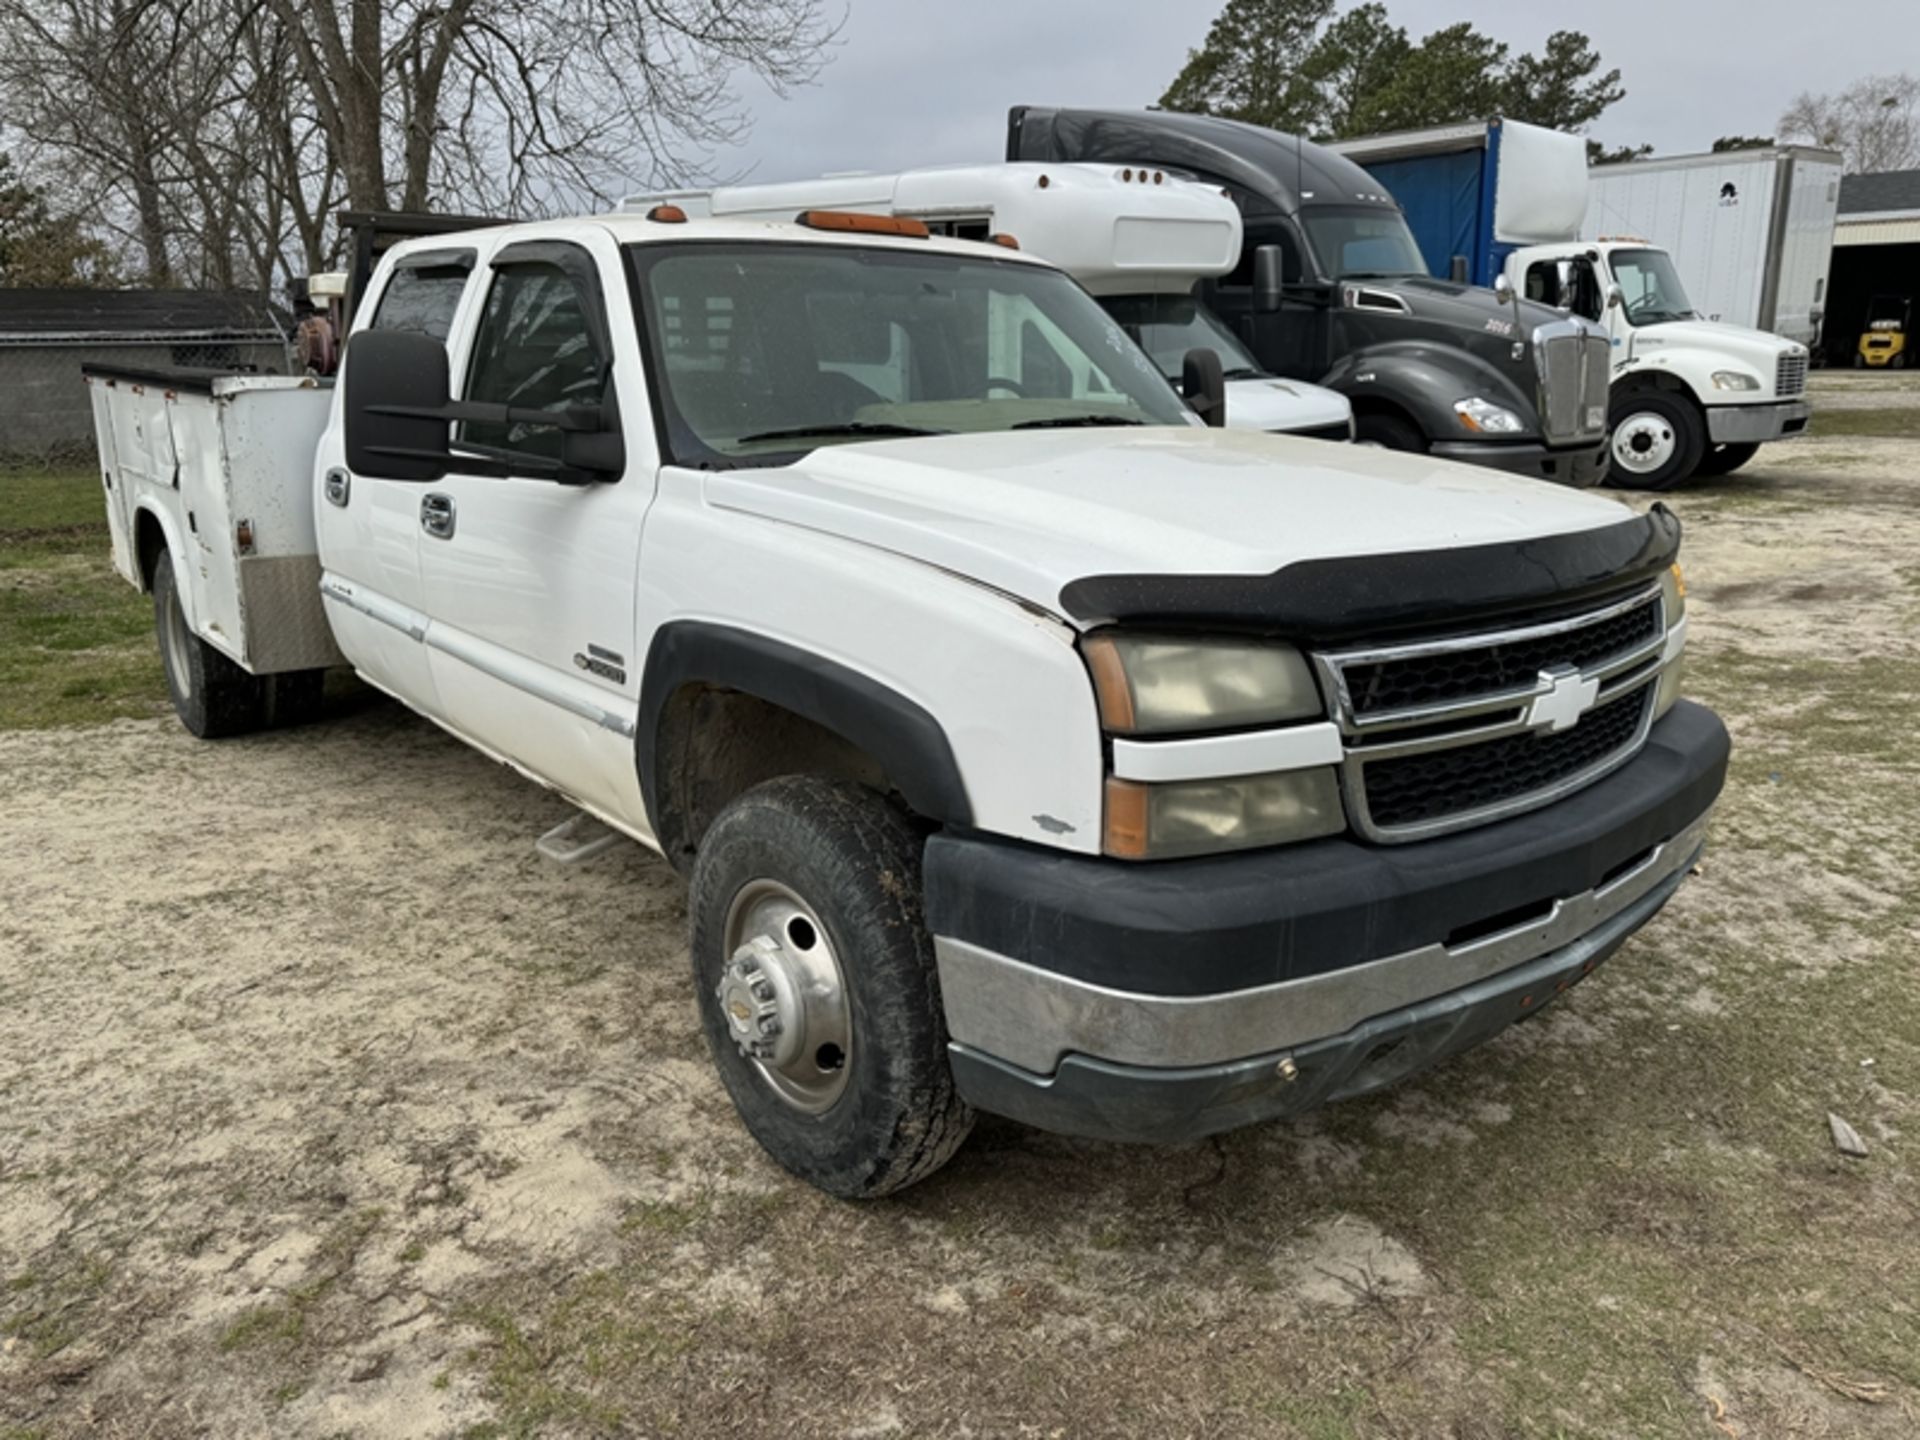 2006 CHEVROLET 3500 dually utility truck with air compressor - 320,838 miles showing - - Image 2 of 7